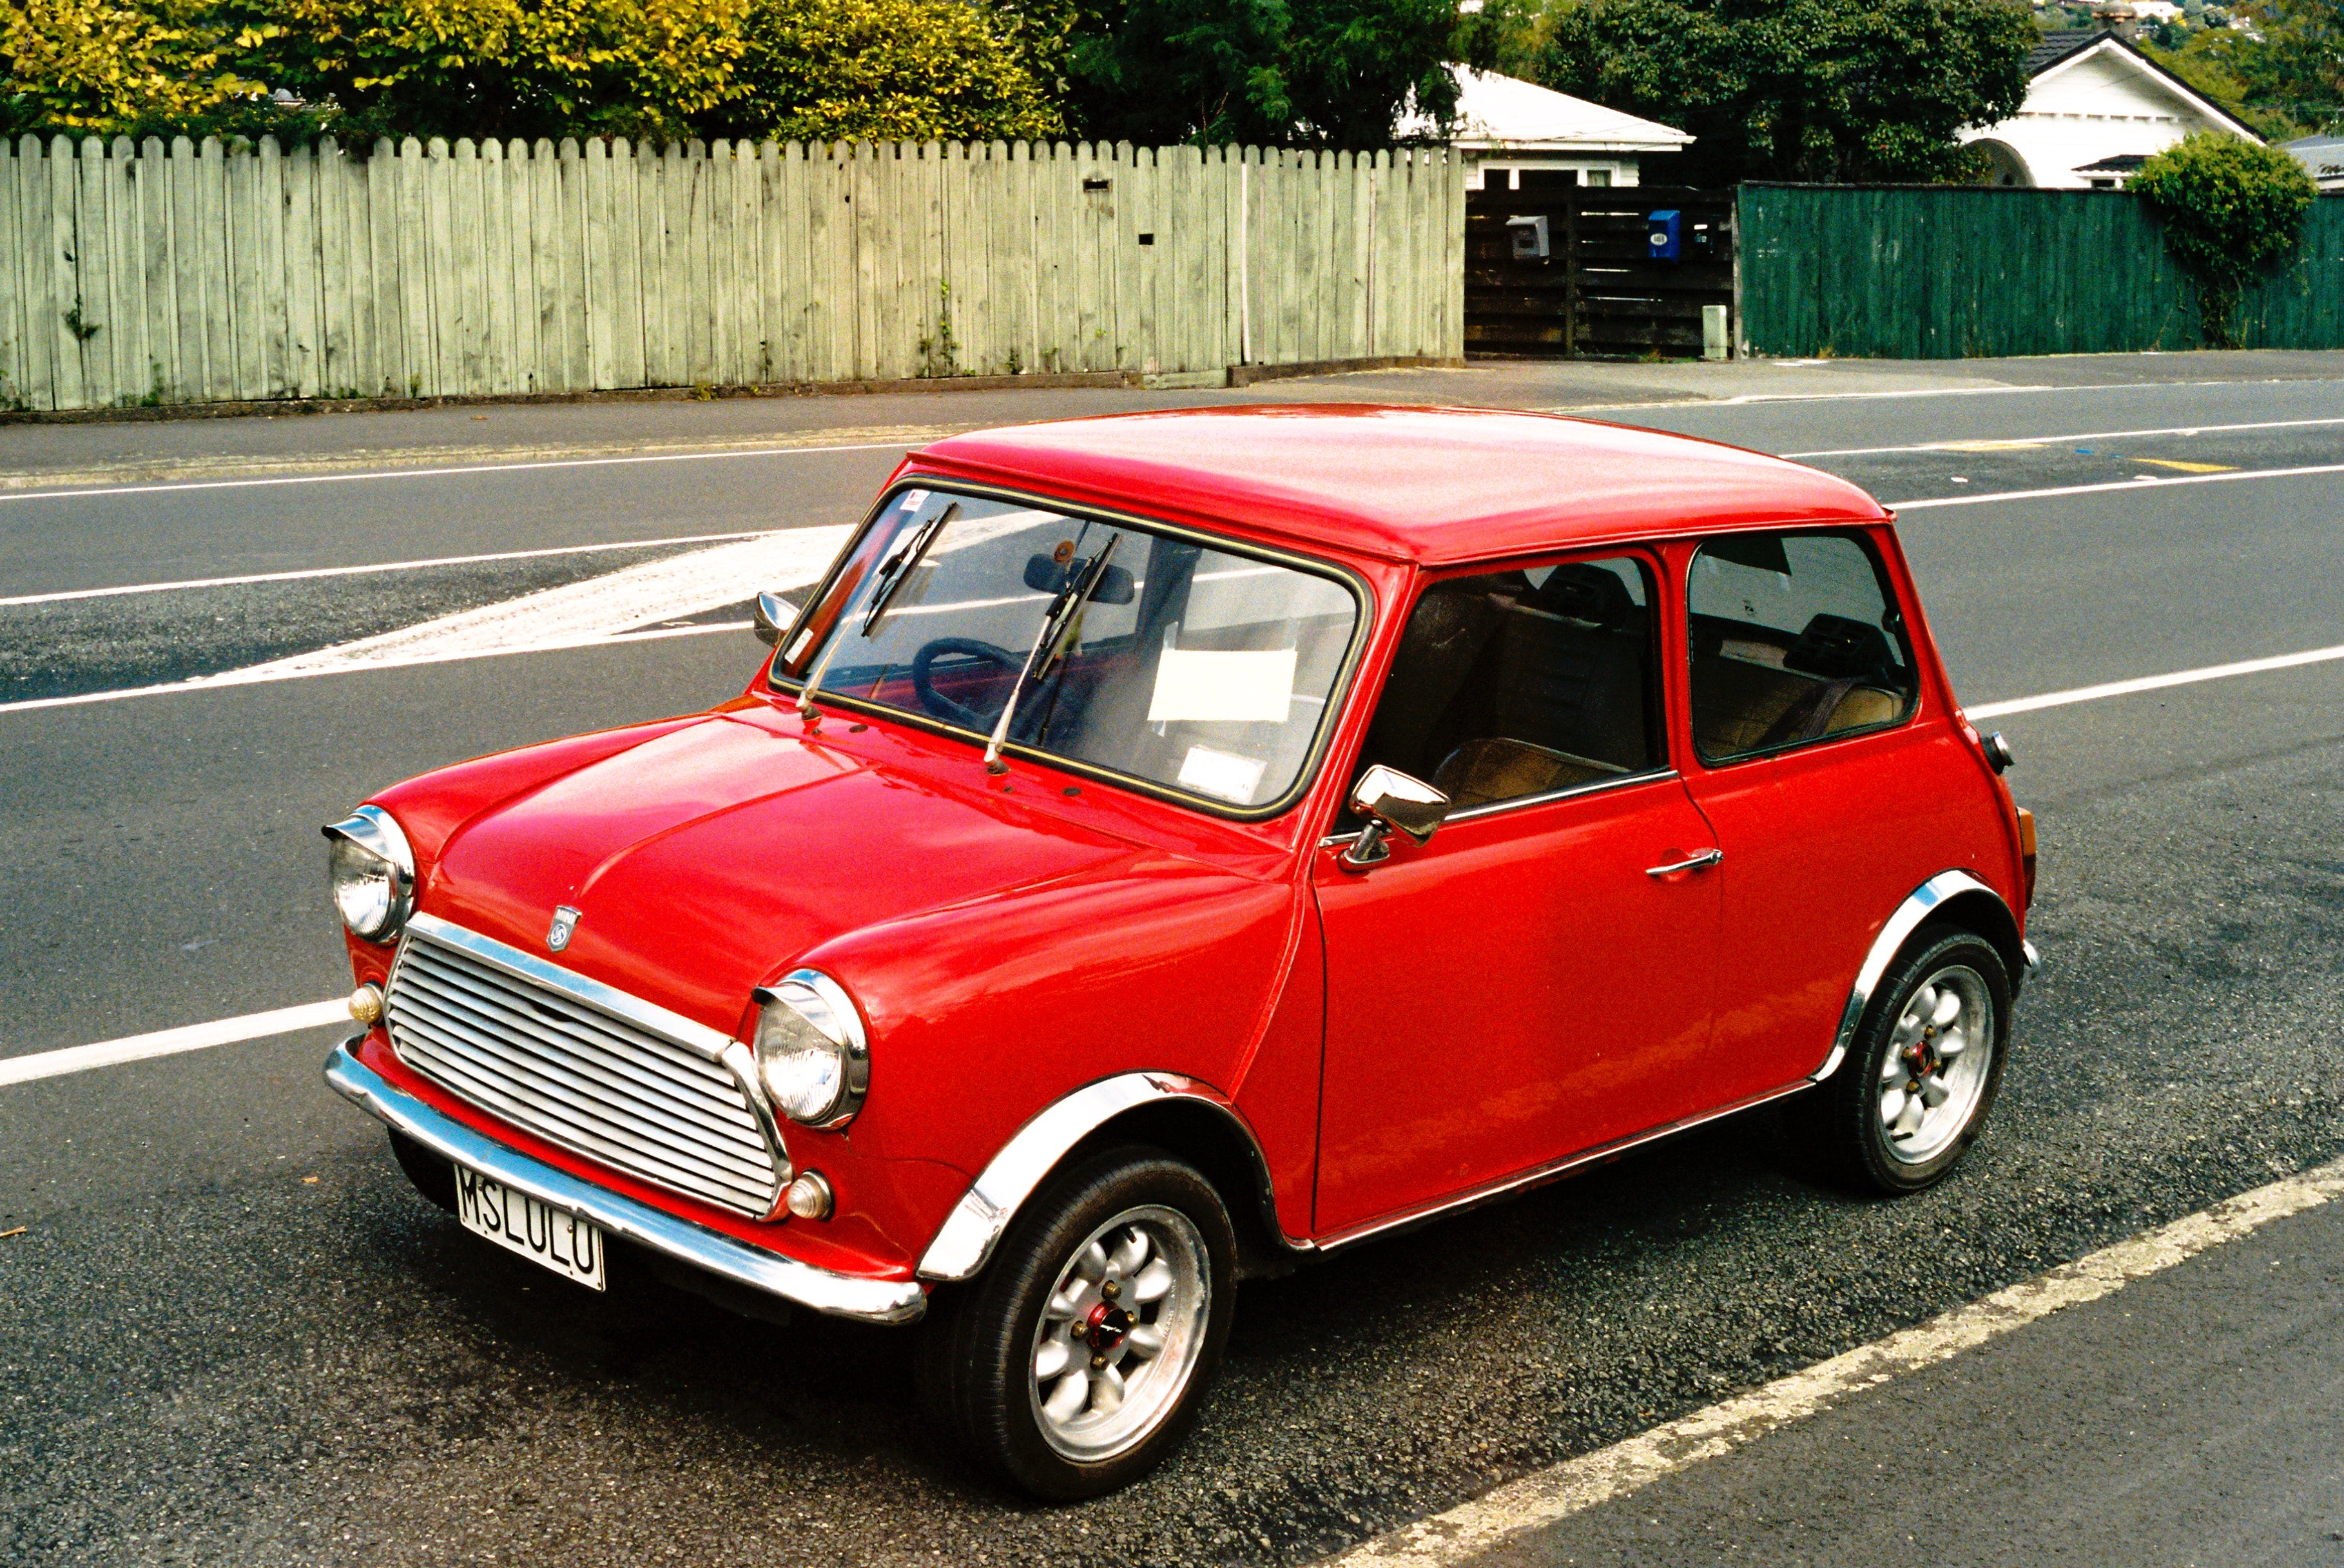 The Story of the Mini Car - A Timeless British Classic